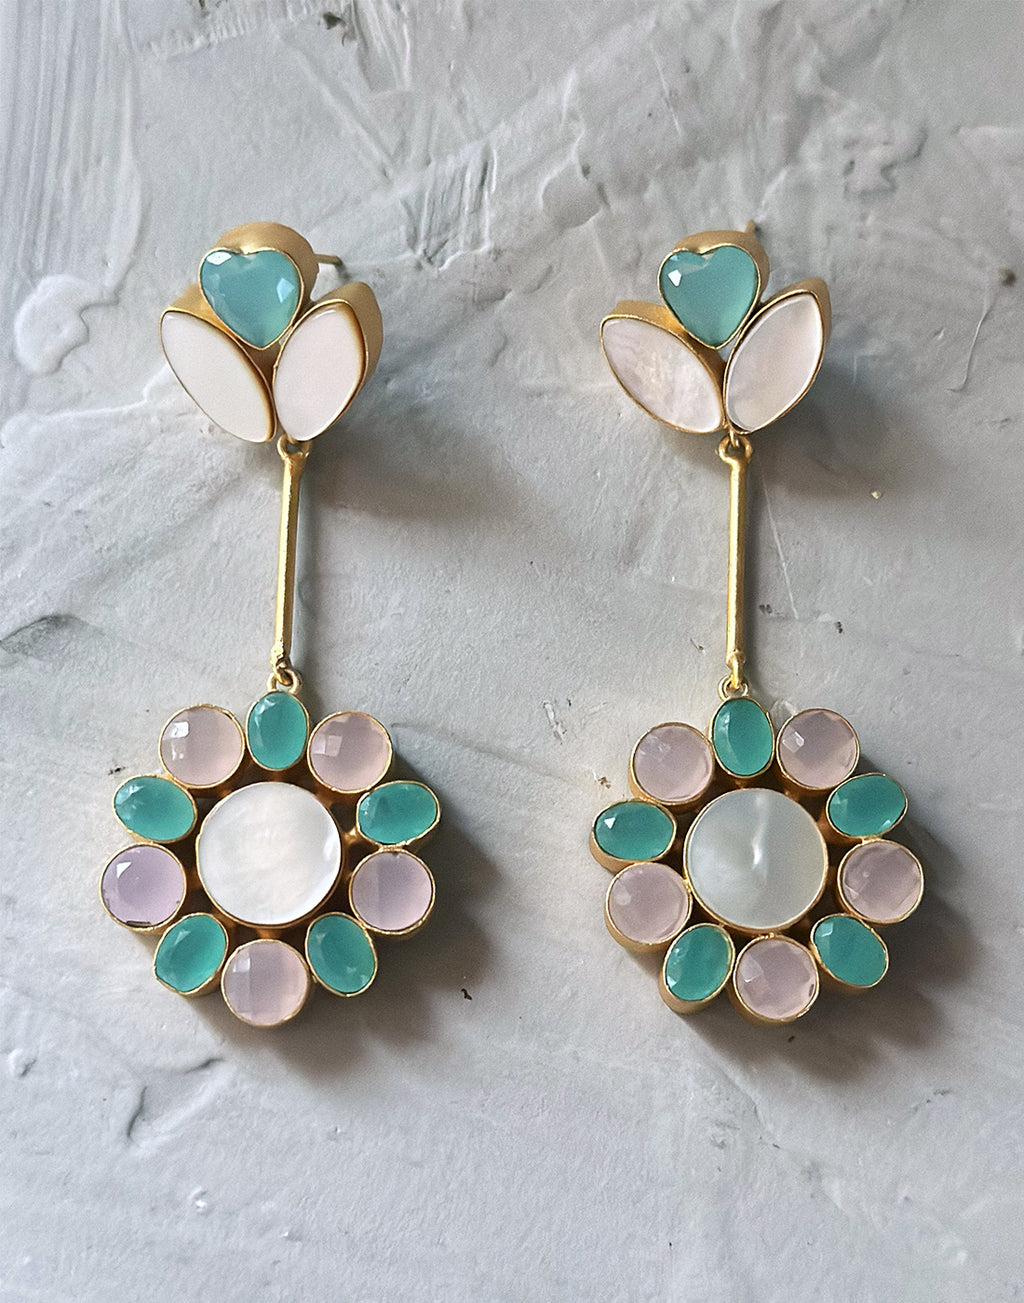 Spring Flower Danglers - Statement Earrings - Gold-Plated & Hypoallergenic Jewellery - Made in India - Dubai Jewellery - Dori